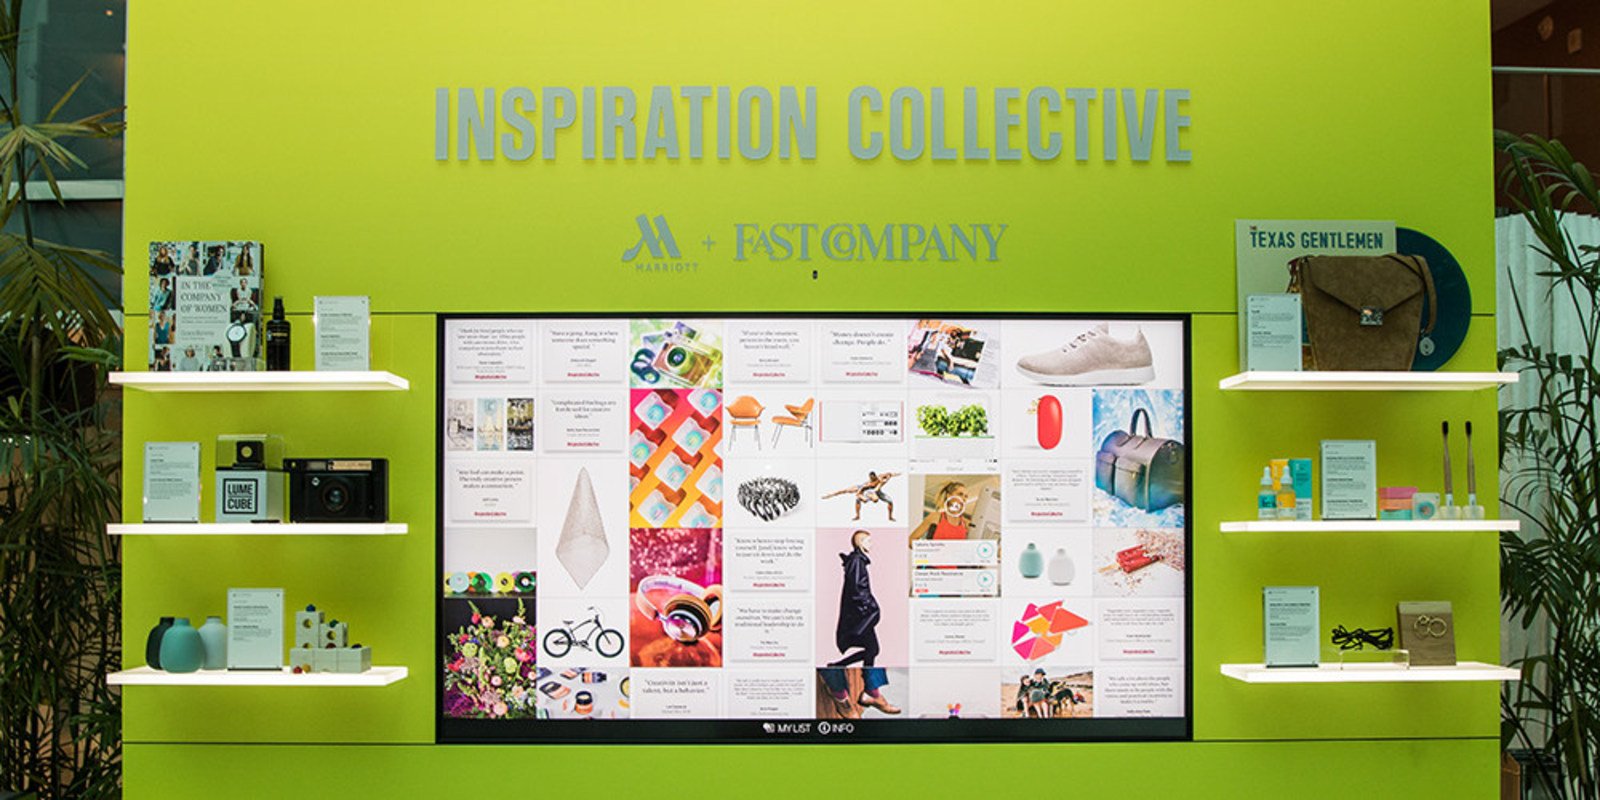 Marriott Fast Company introduce the Inspiration Collective